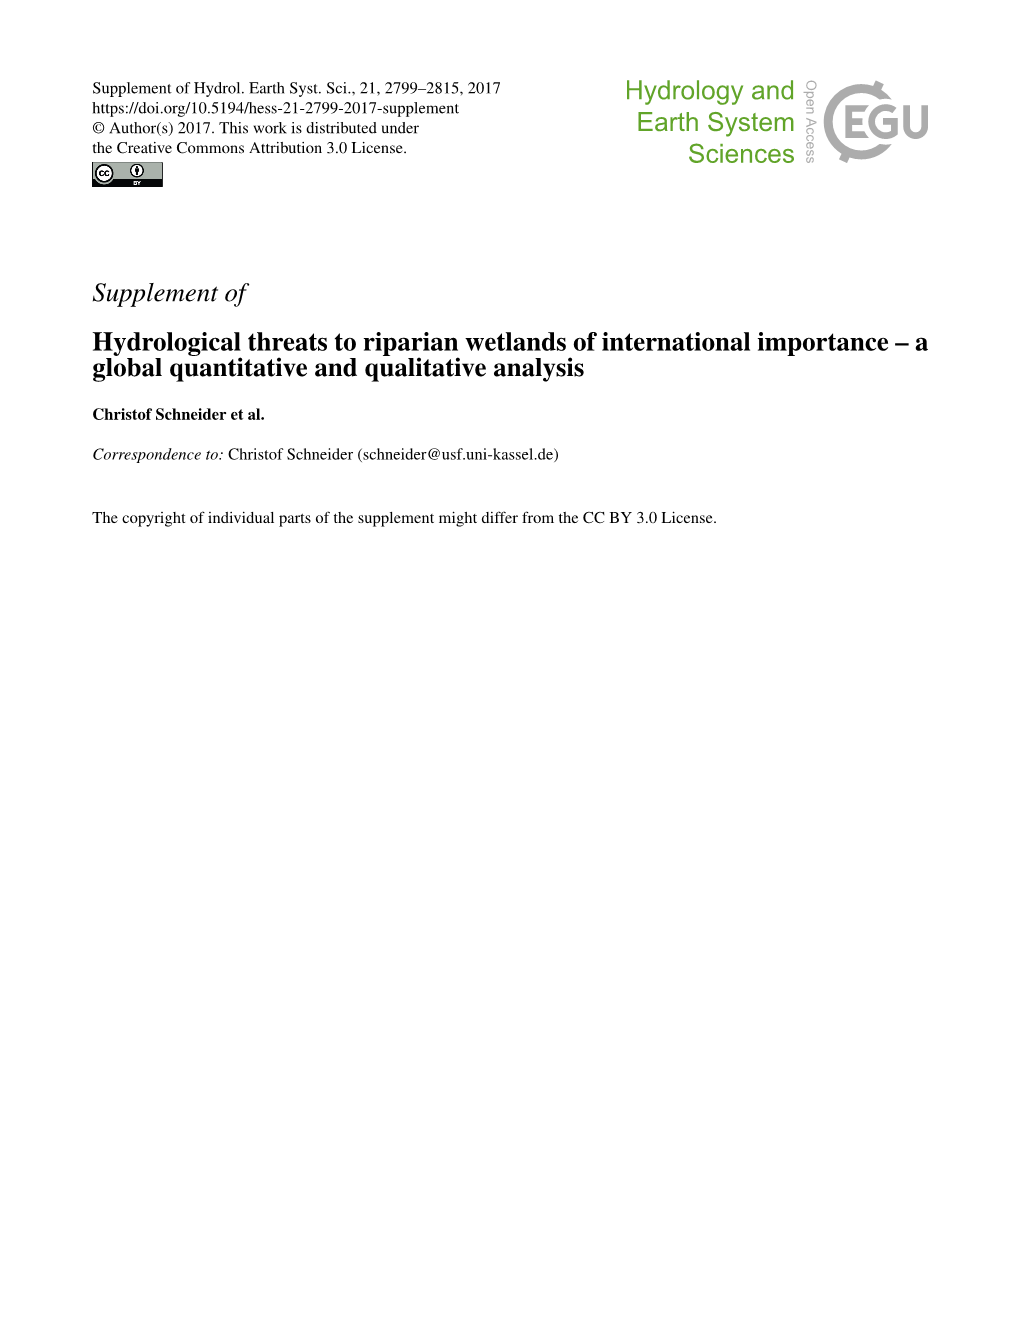 Supplement of Hydrological Threats to Riparian Wetlands of International Importance – a Global Quantitative and Qualitative Analysis